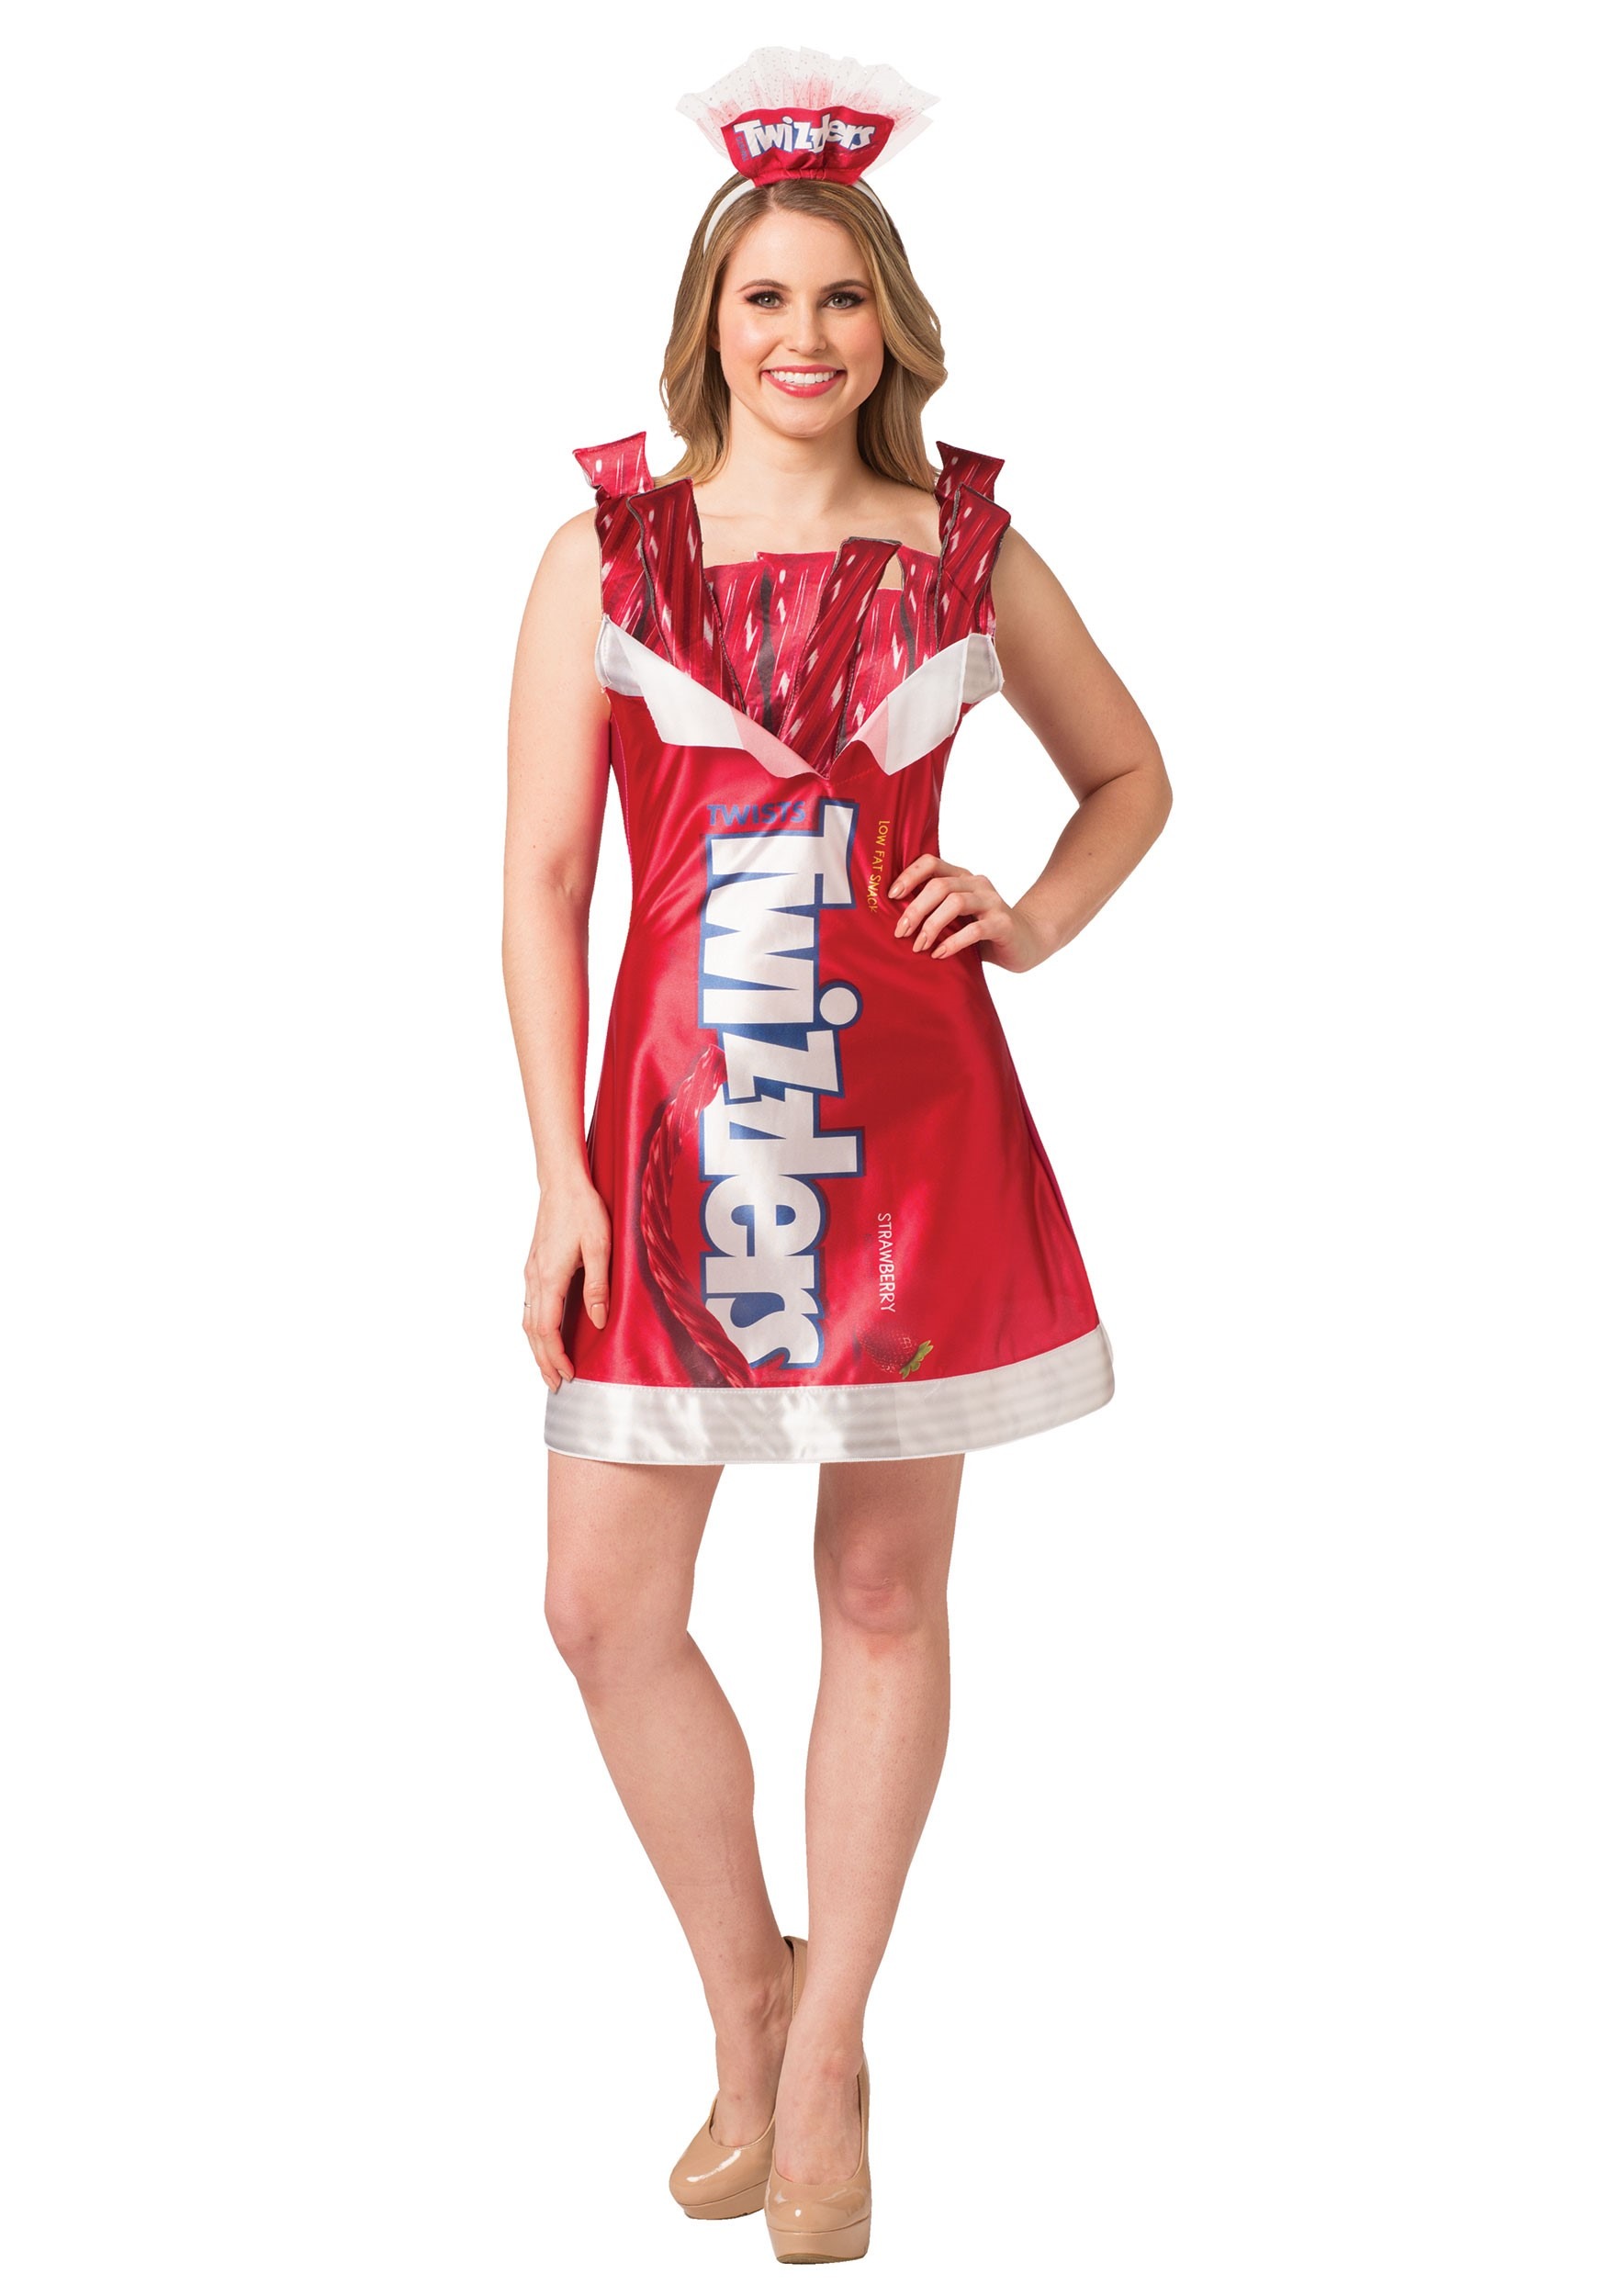 Photos - Fancy Dress Morris Costumes Twizzlers Women's Costume Red/White MO3594 